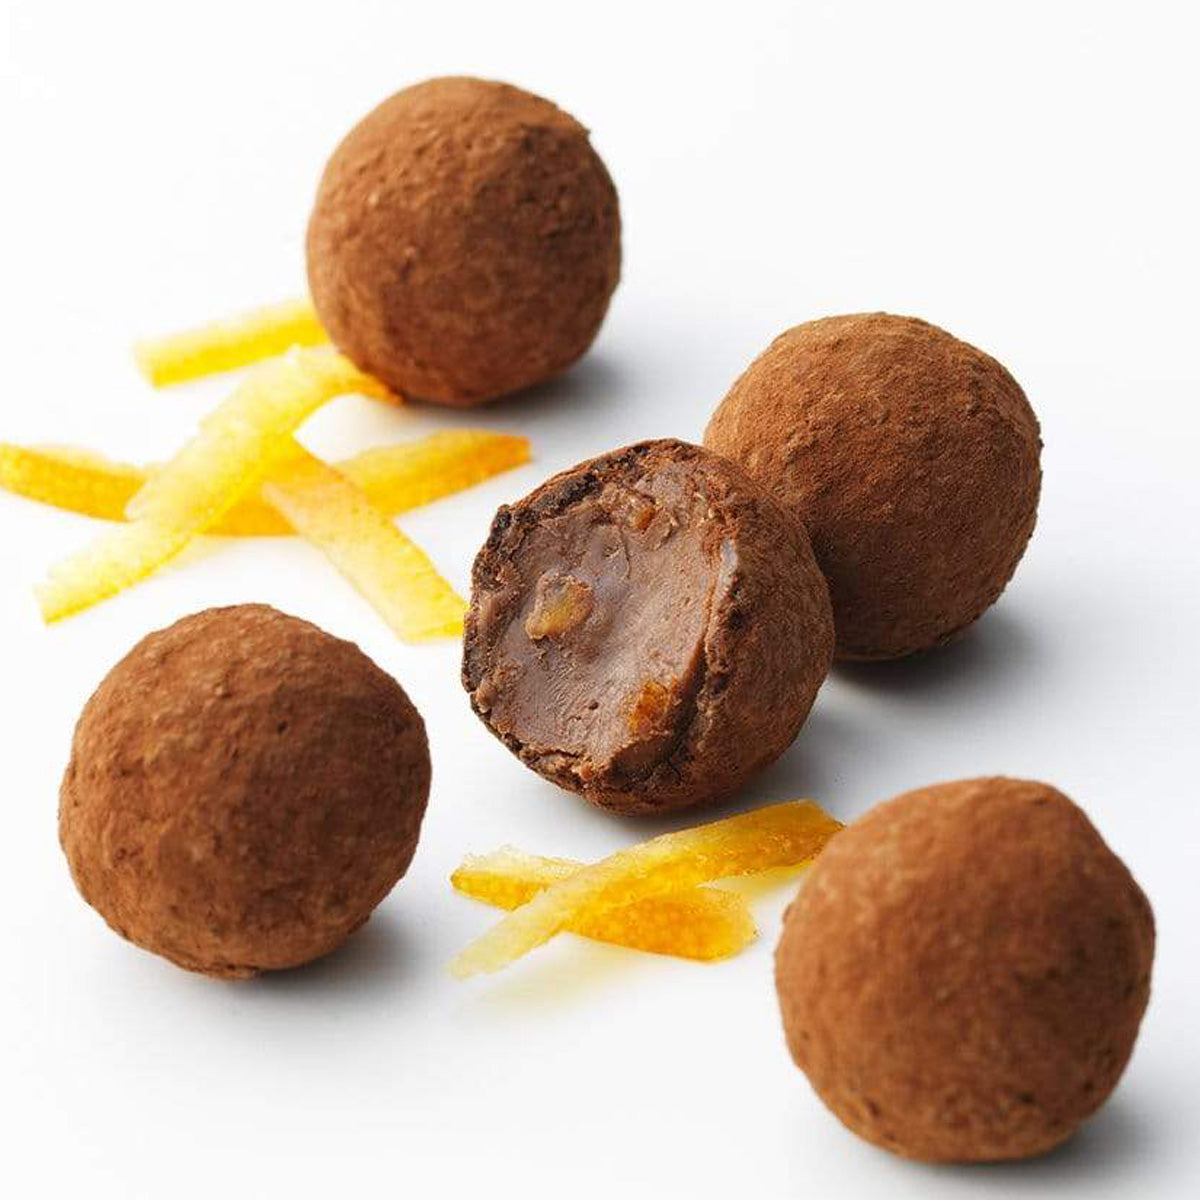 ROYCE' Chocolate - Petite Truffe "Orange" - Image shows brown chocolate balls on a white surface with orange peels.